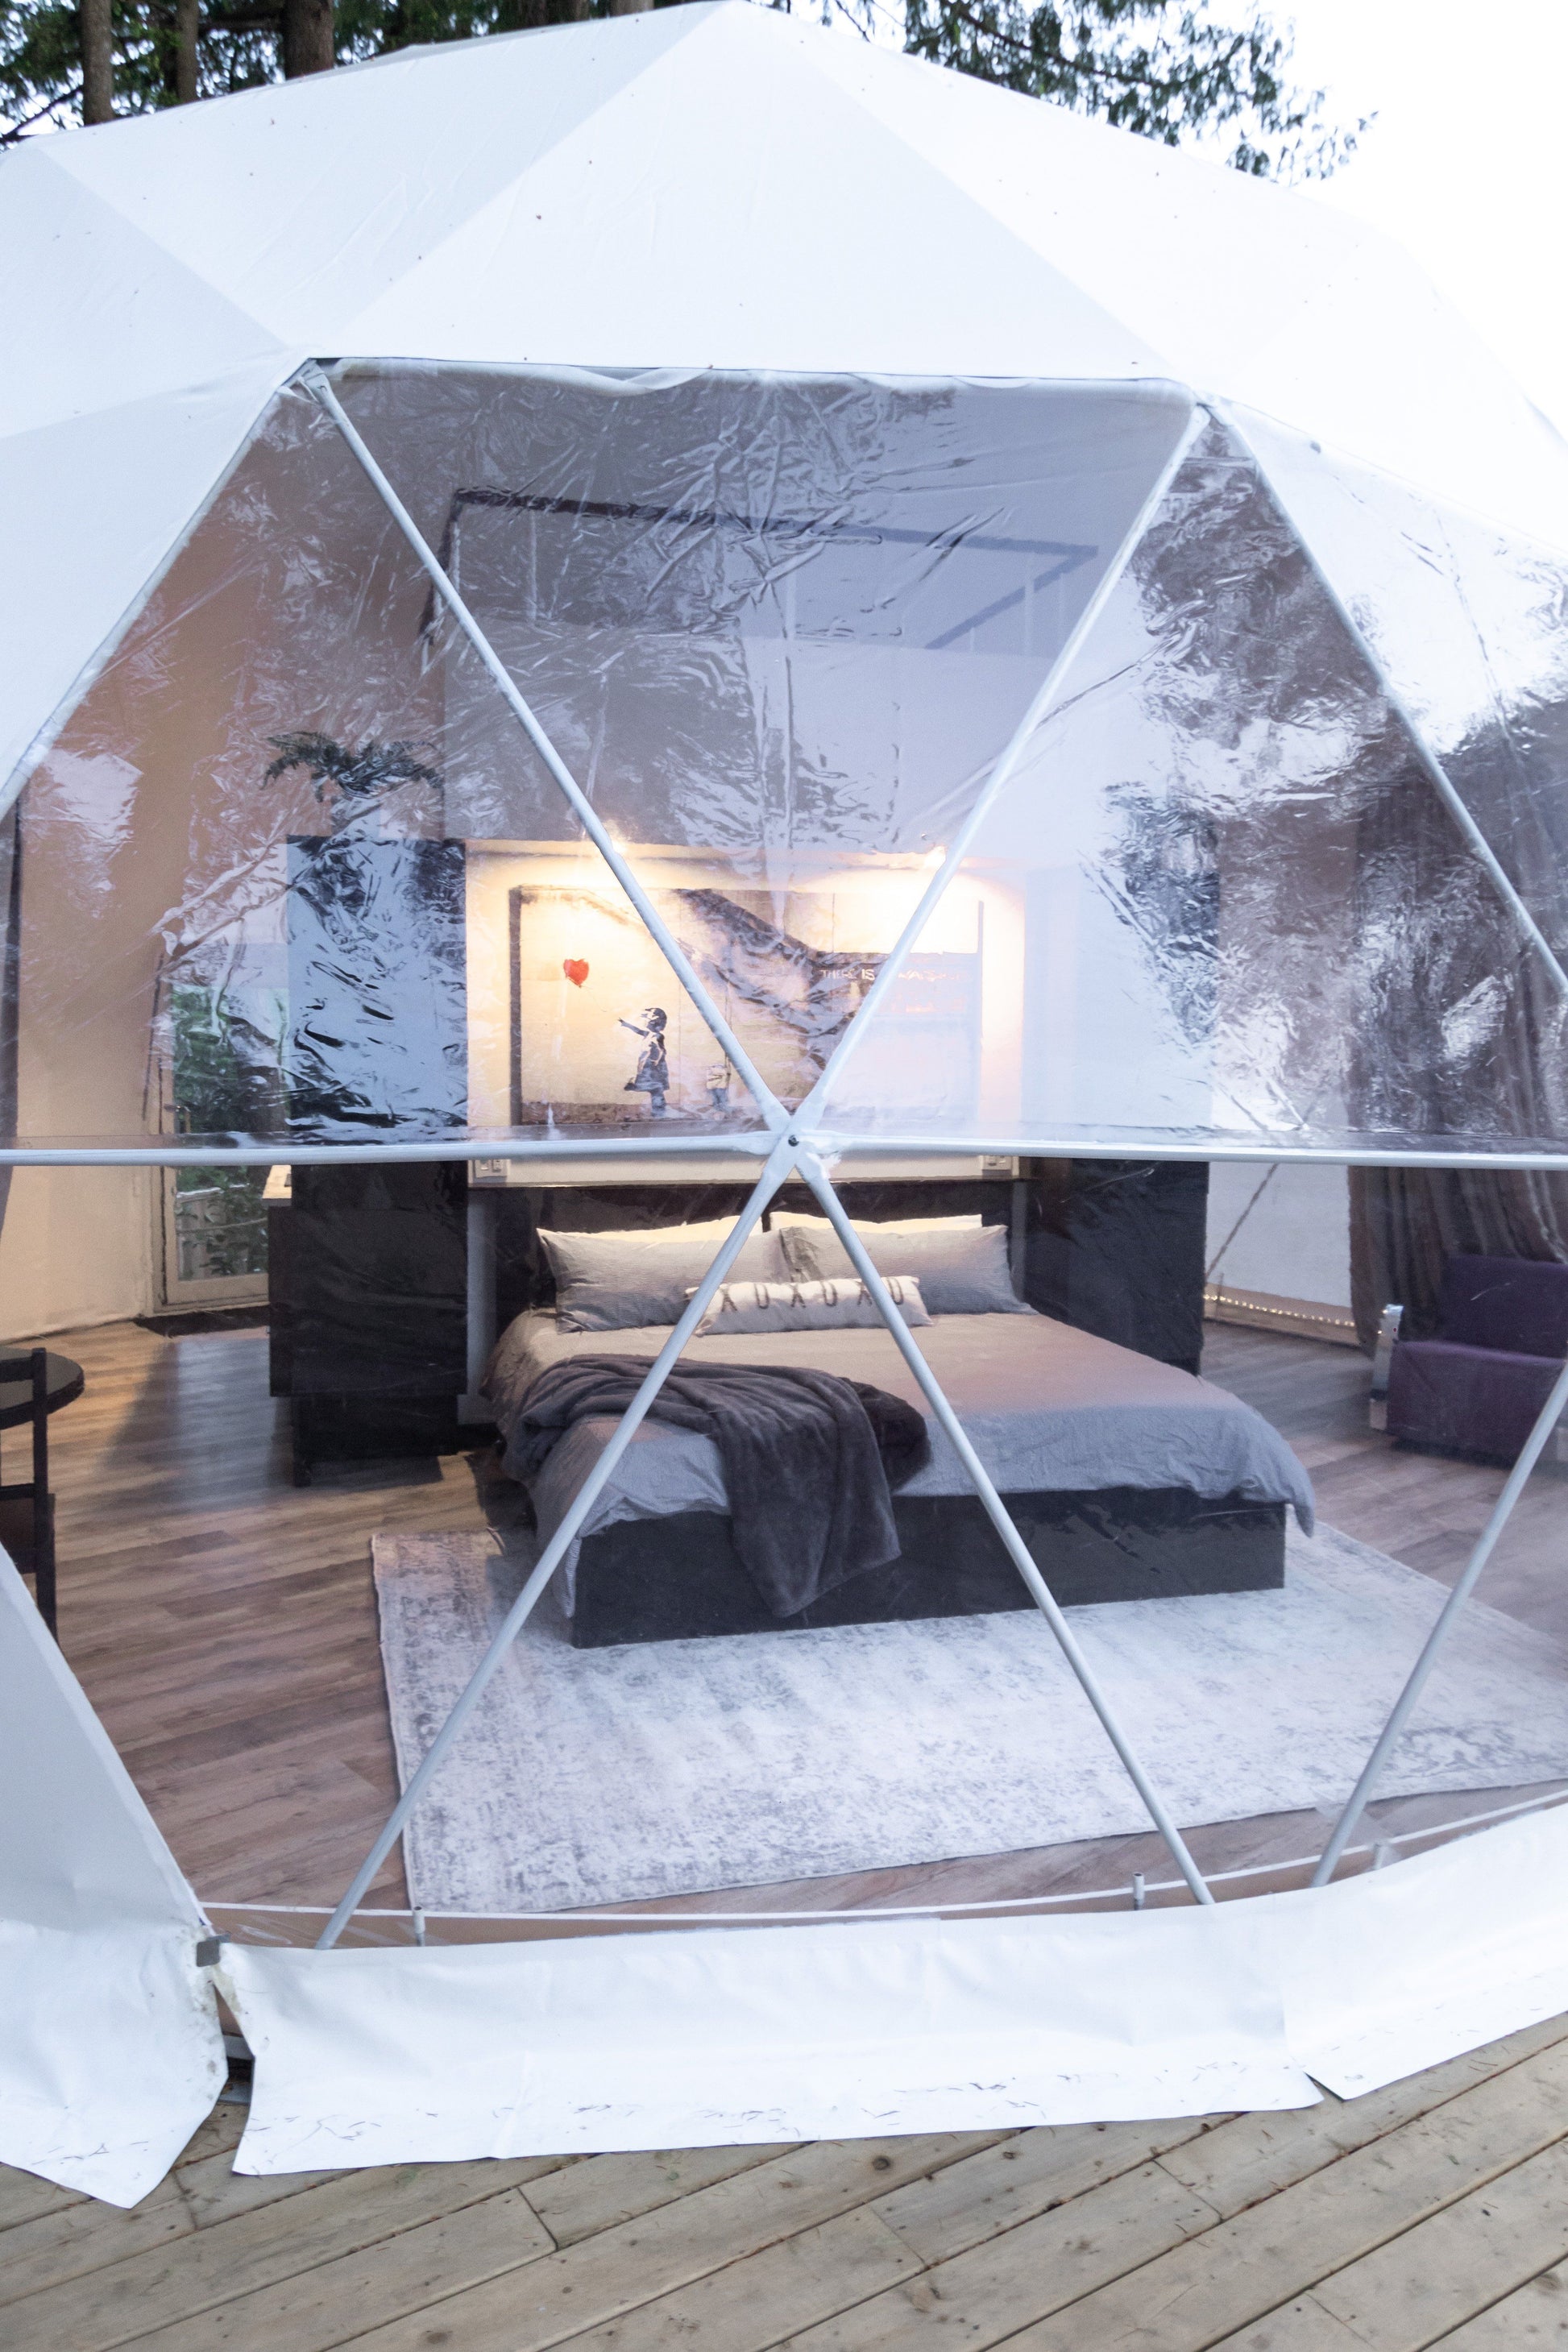 The Compact Hot Yoga Home Dome